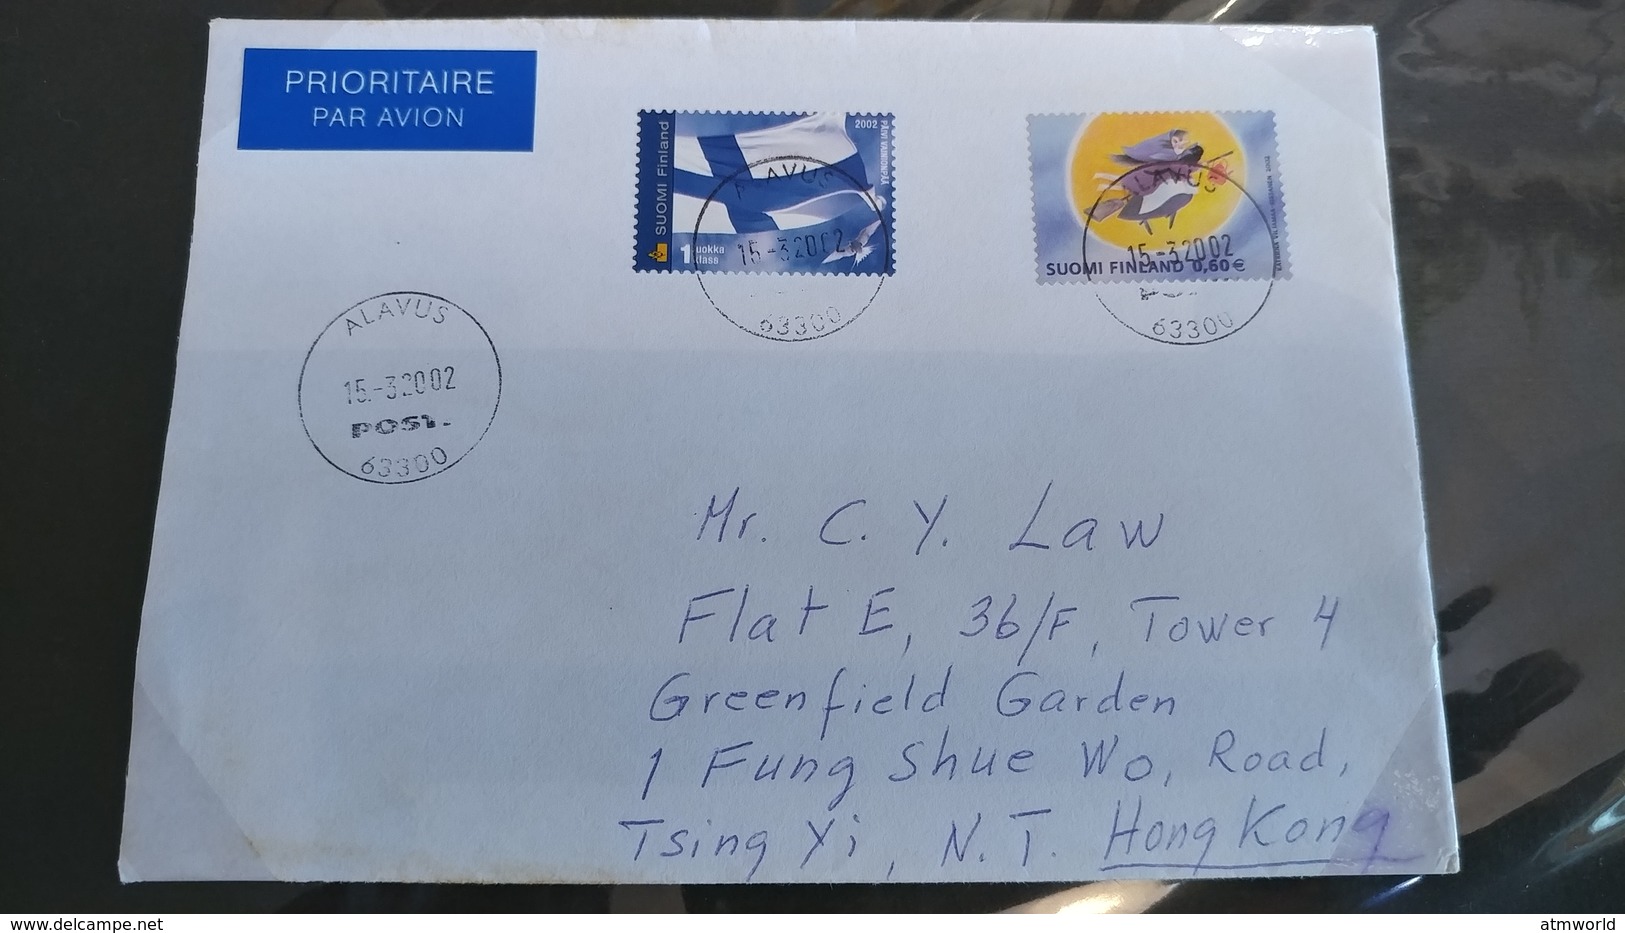 Postal Cover from Finland to Hong Kong